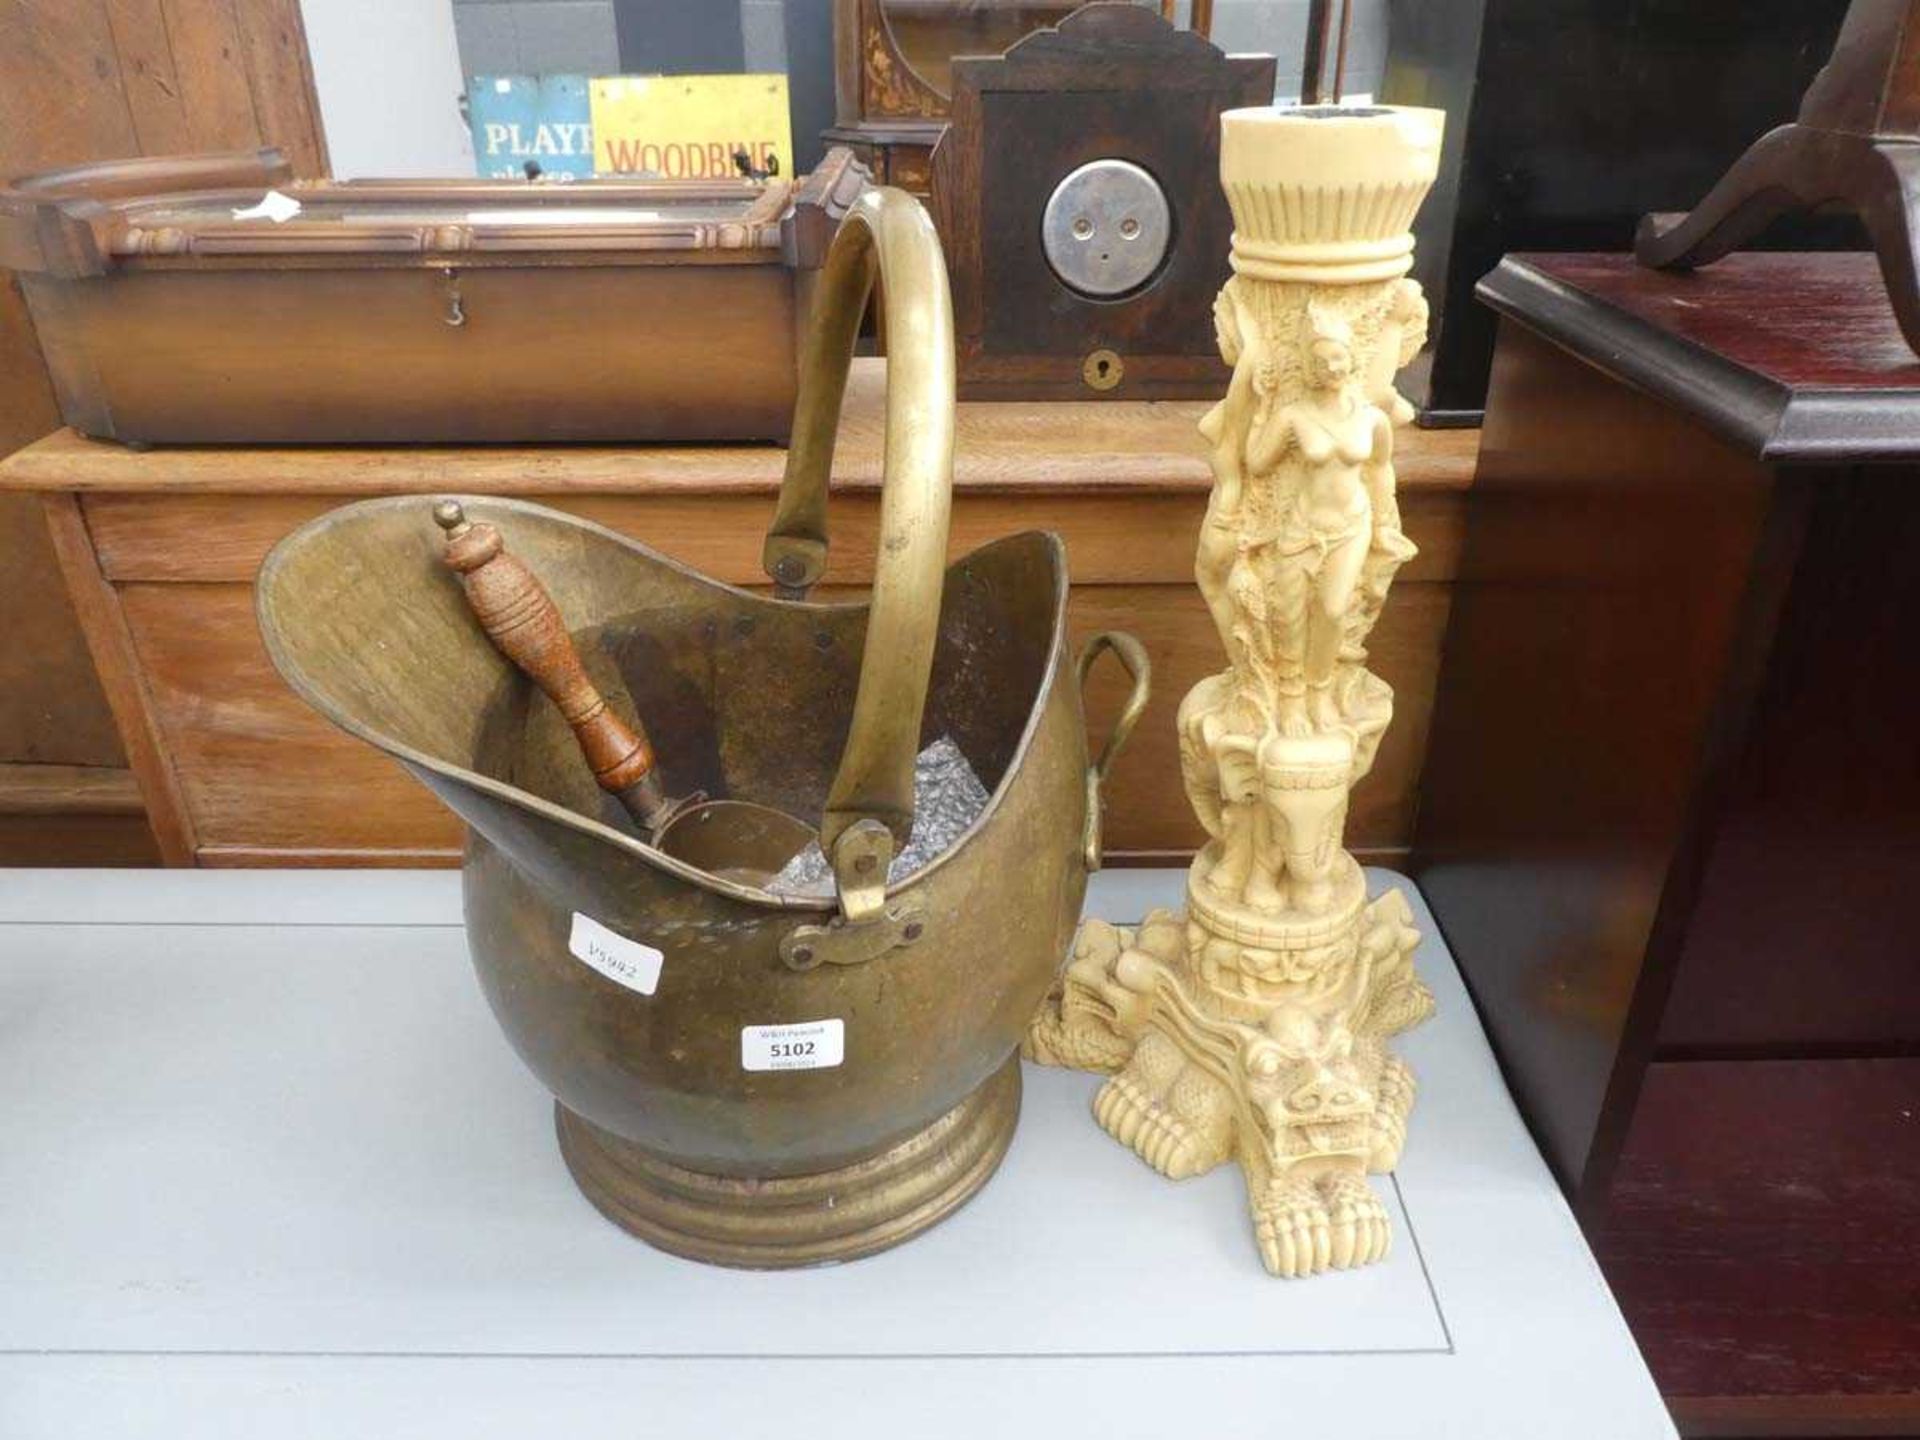 Coal scuttle with shovel